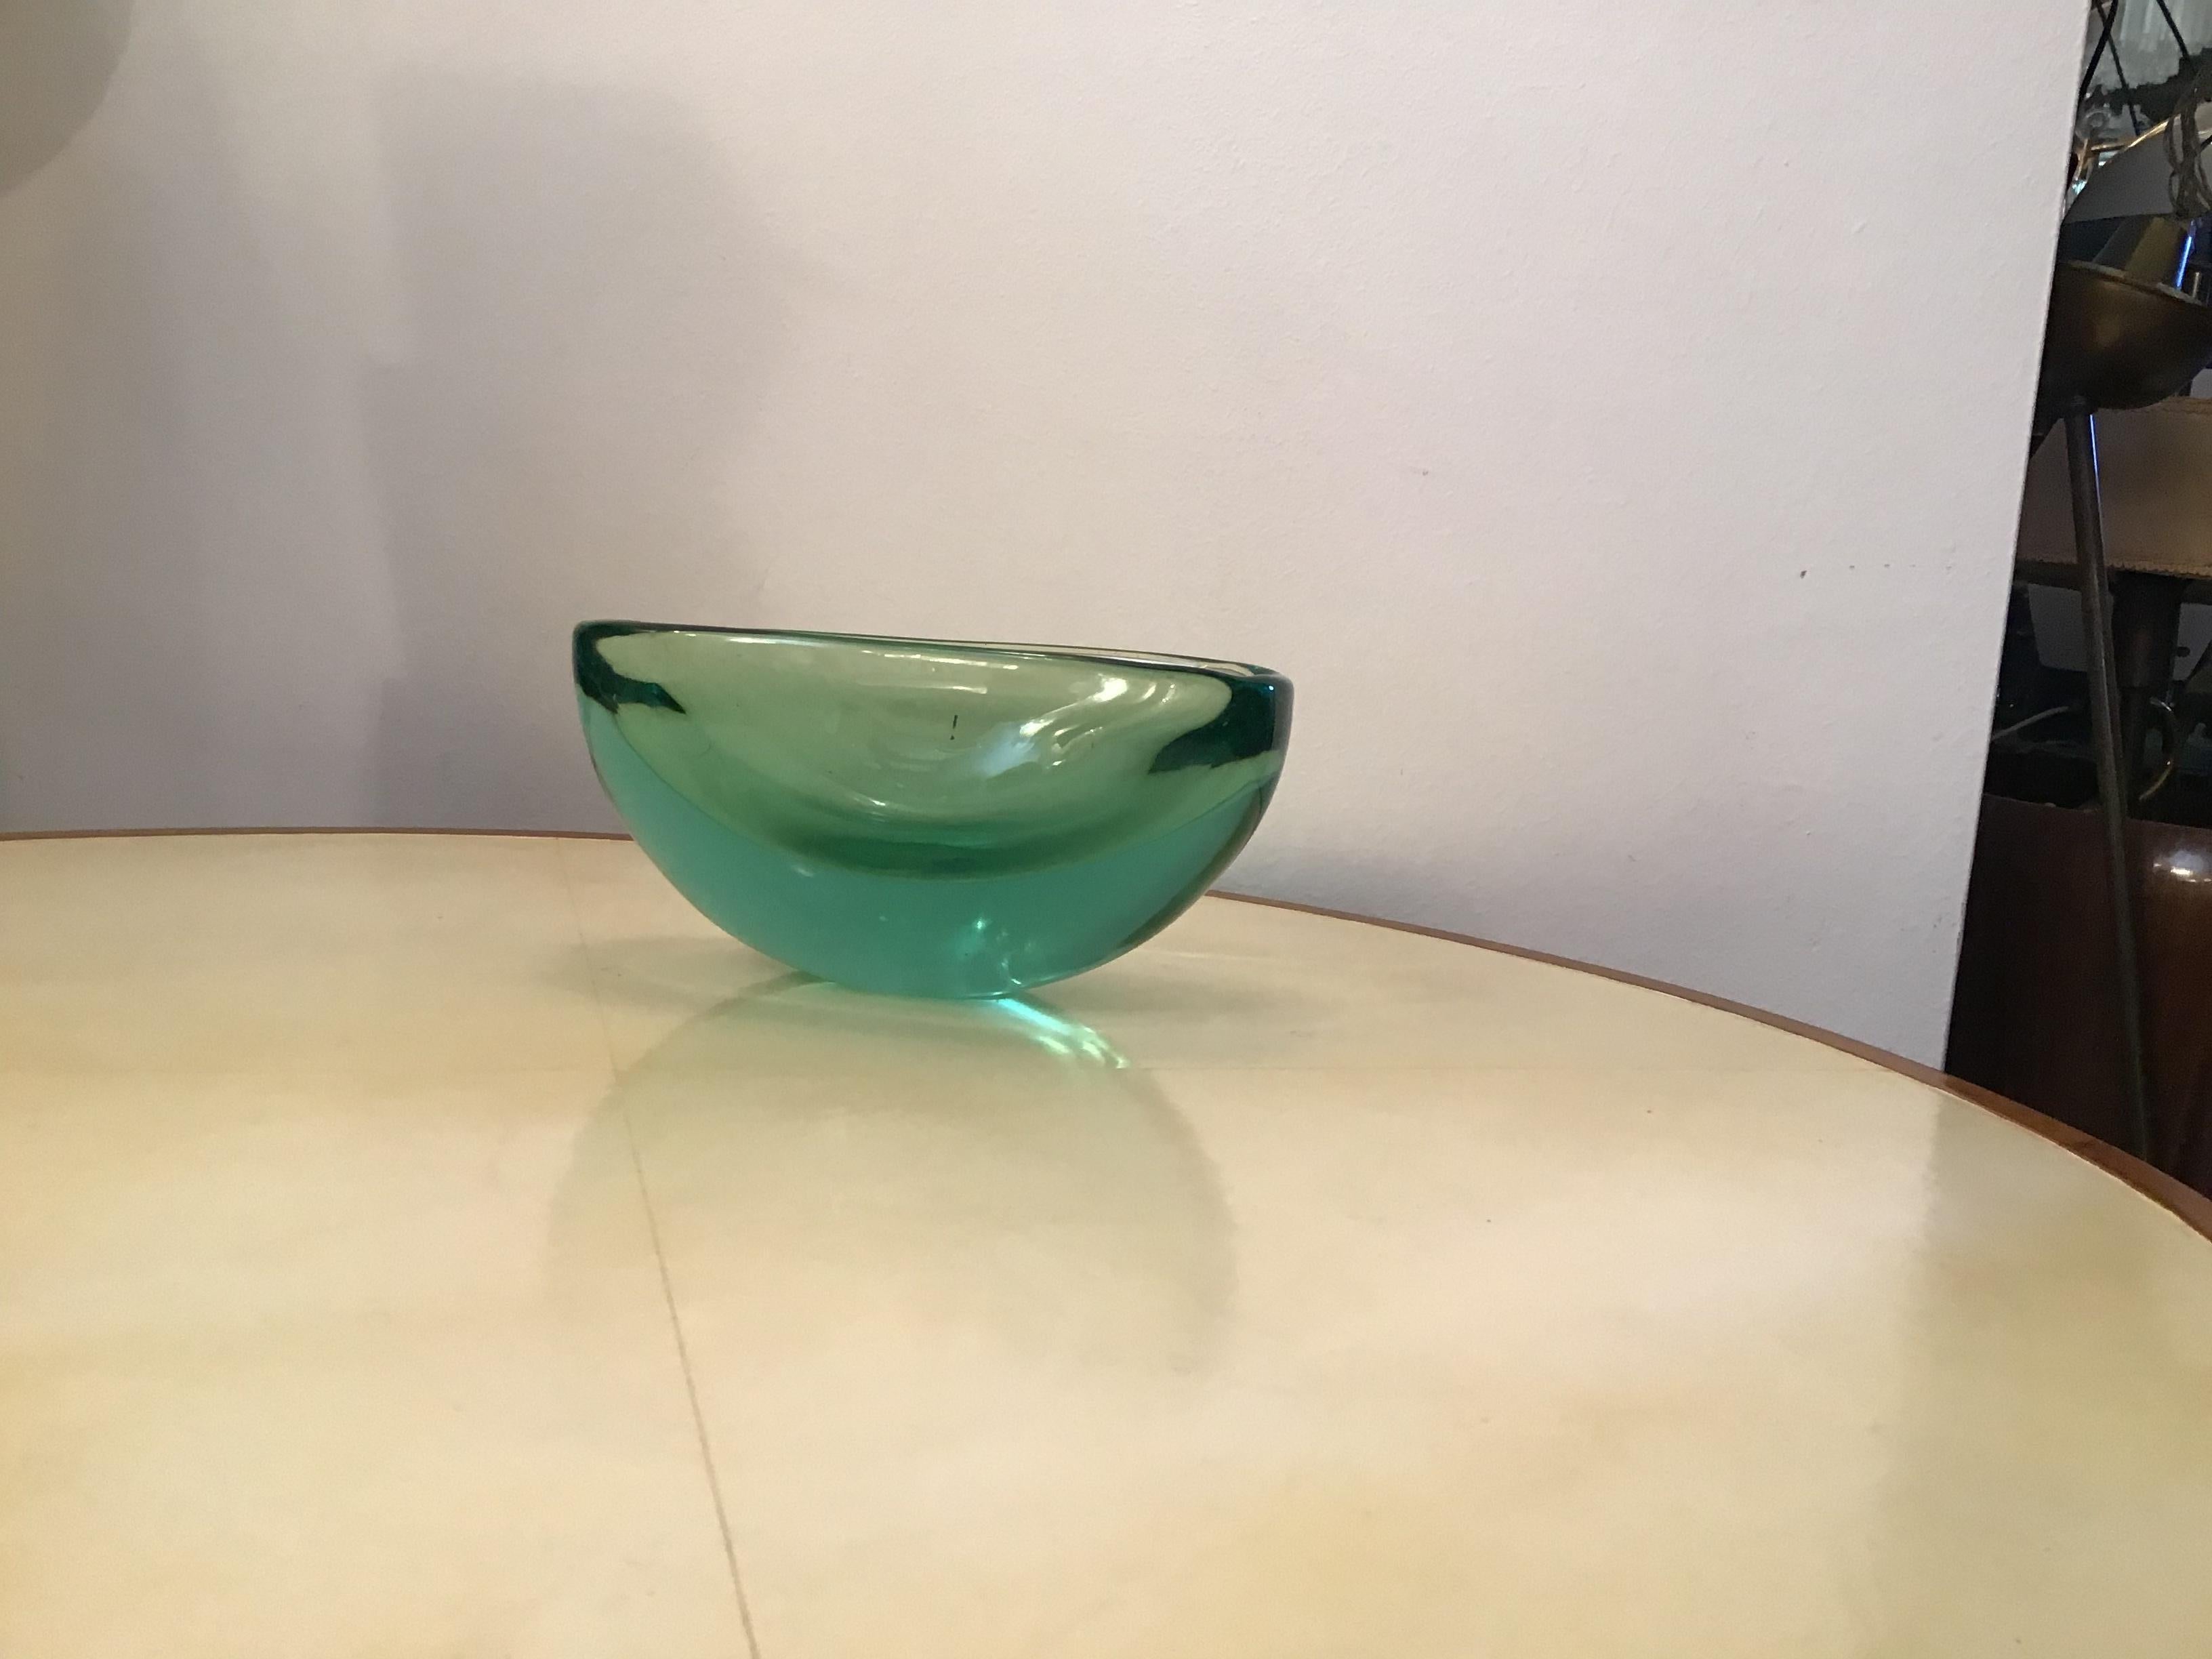 Archimede Seguso Oval Bowl, Green Submerged Glass Centrepiece, 1950 For Sale 3